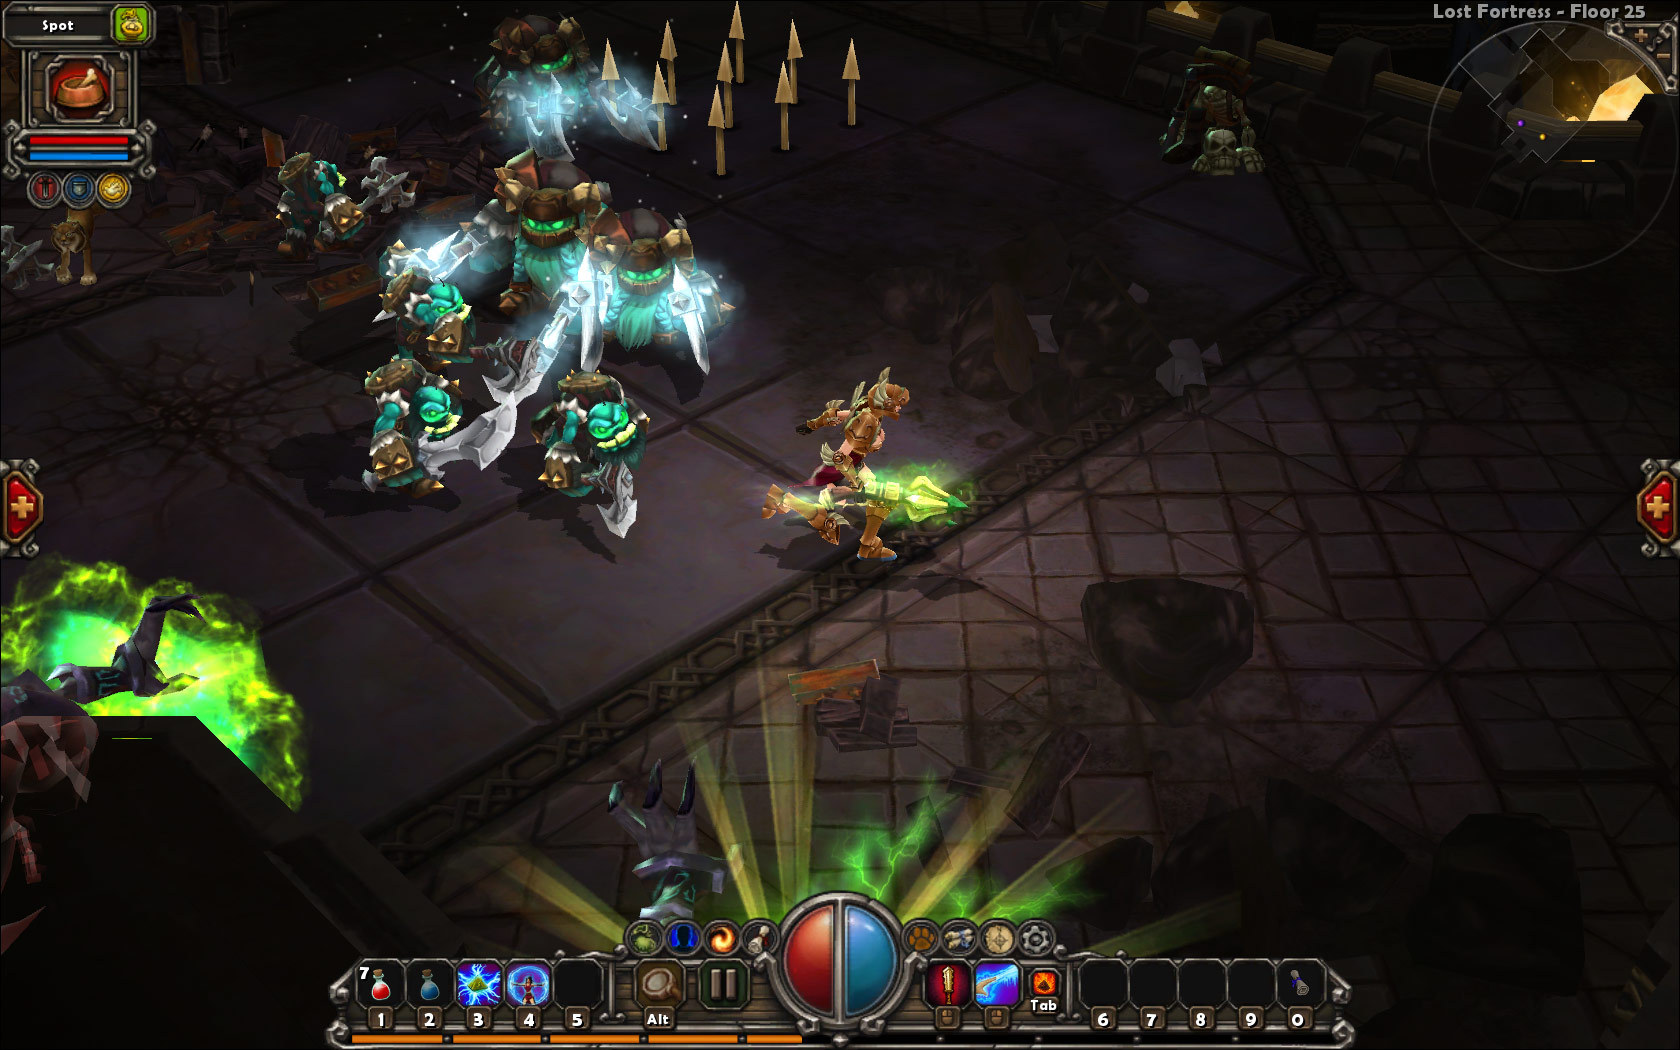 download free torchlight 2 game